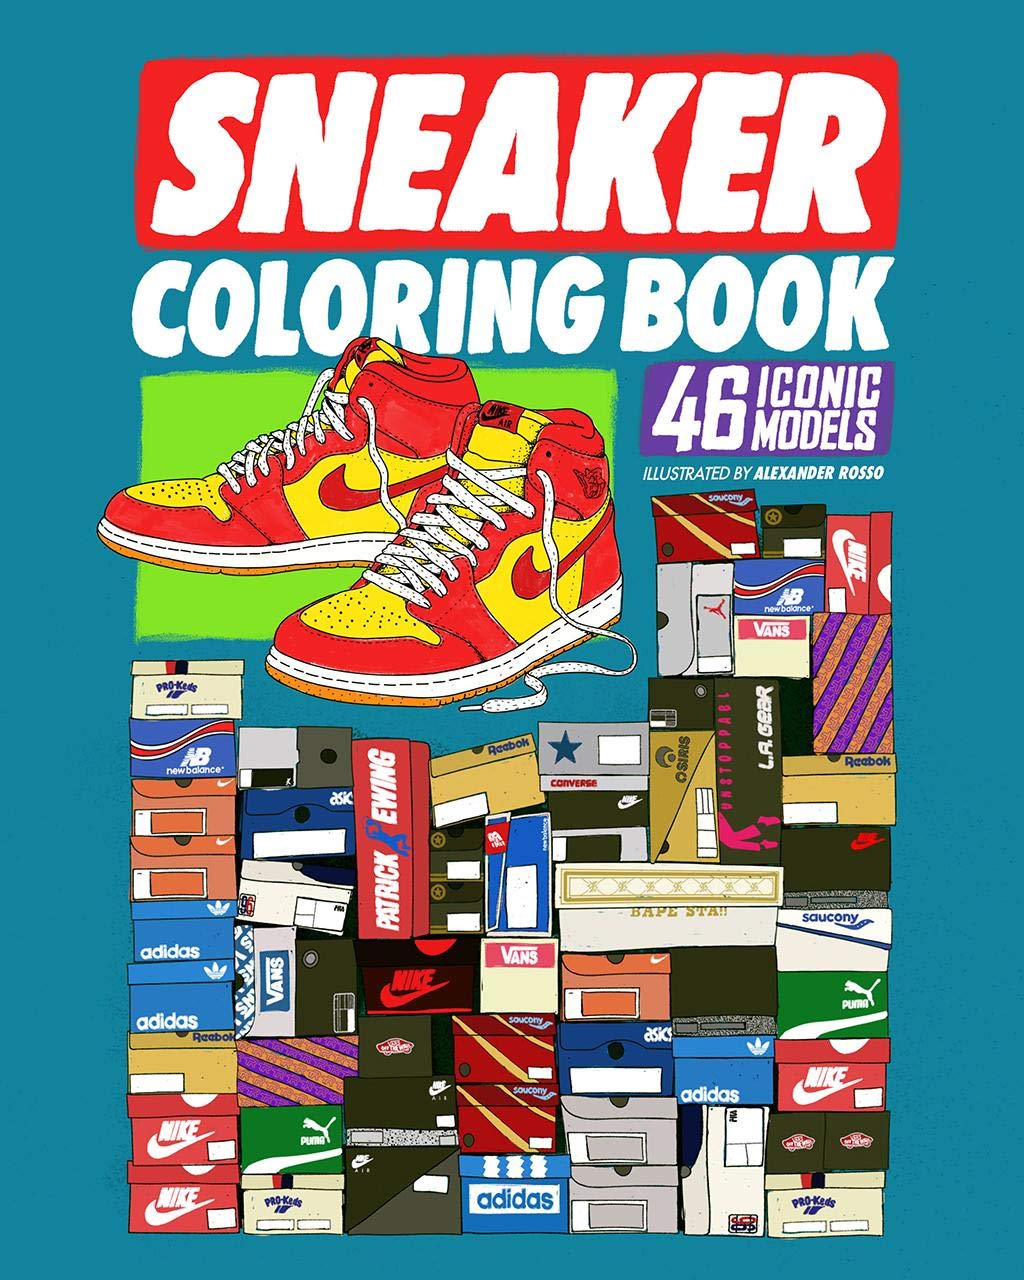 Sneaker-Coloring-Book-46-Iconic-Models